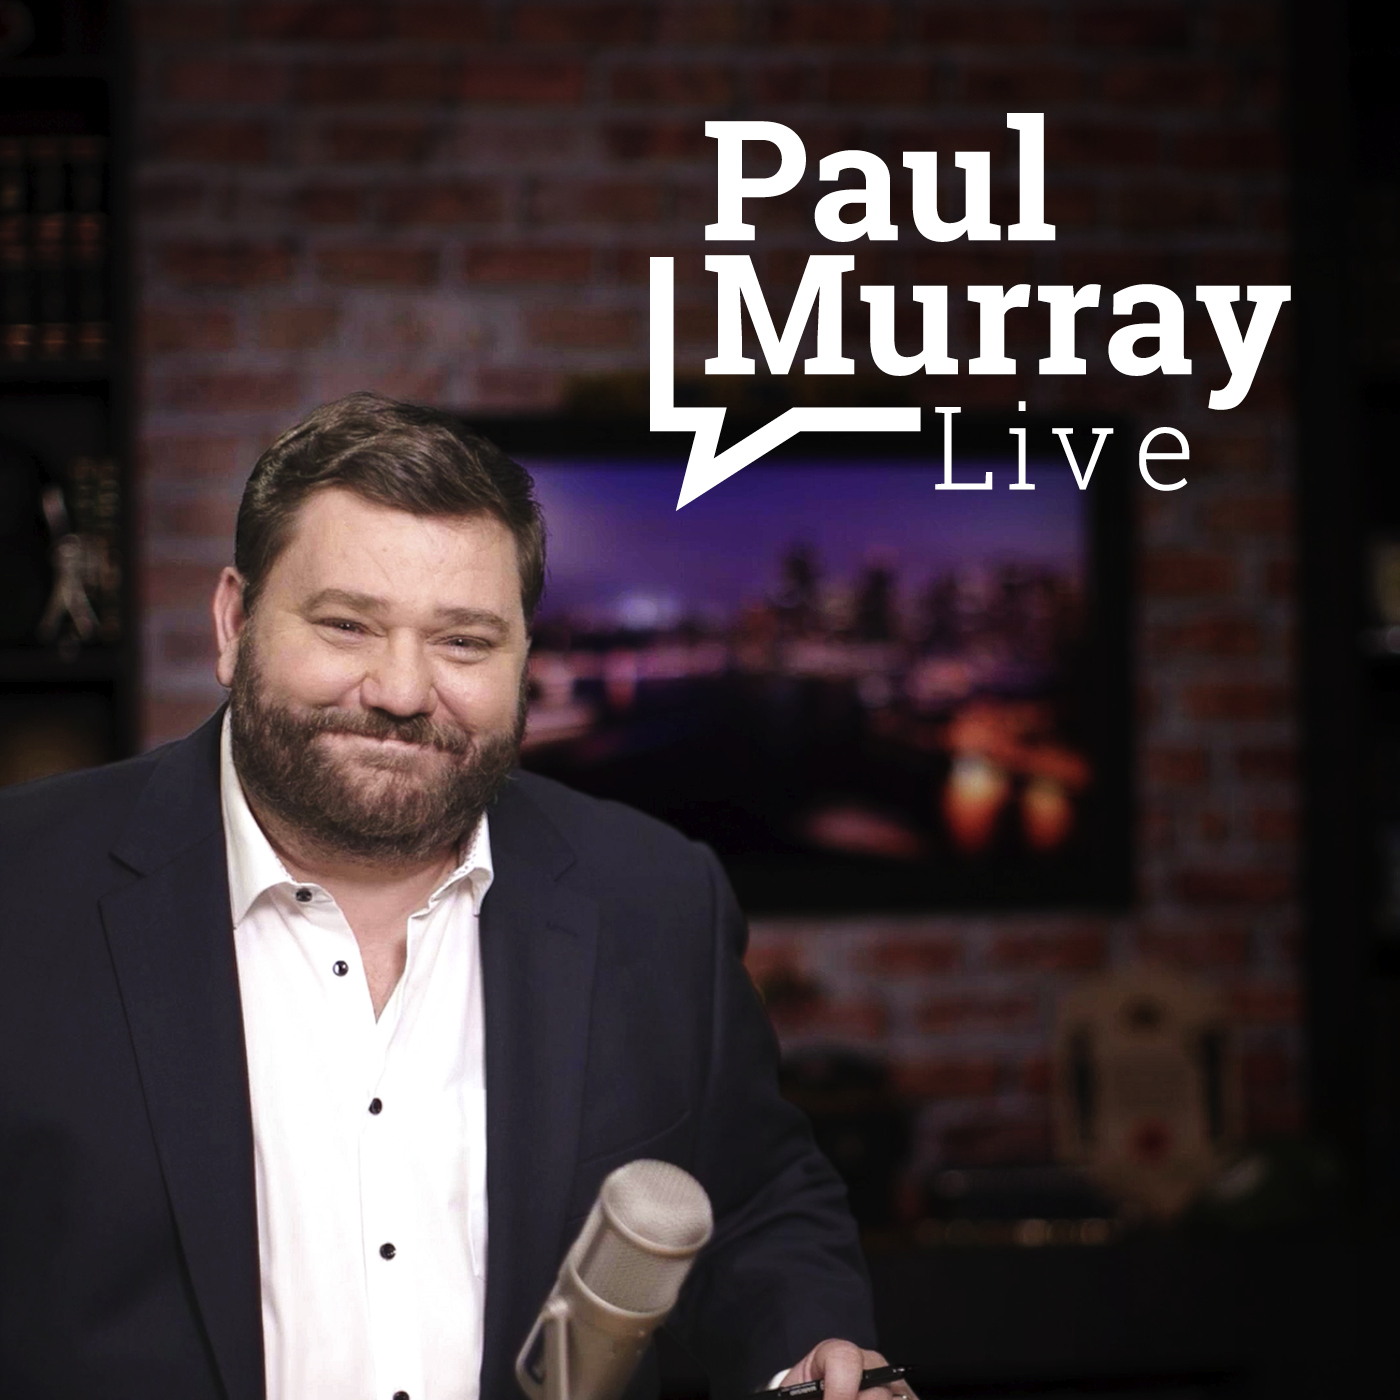 Paul Murray Live, Tuesday 4th August